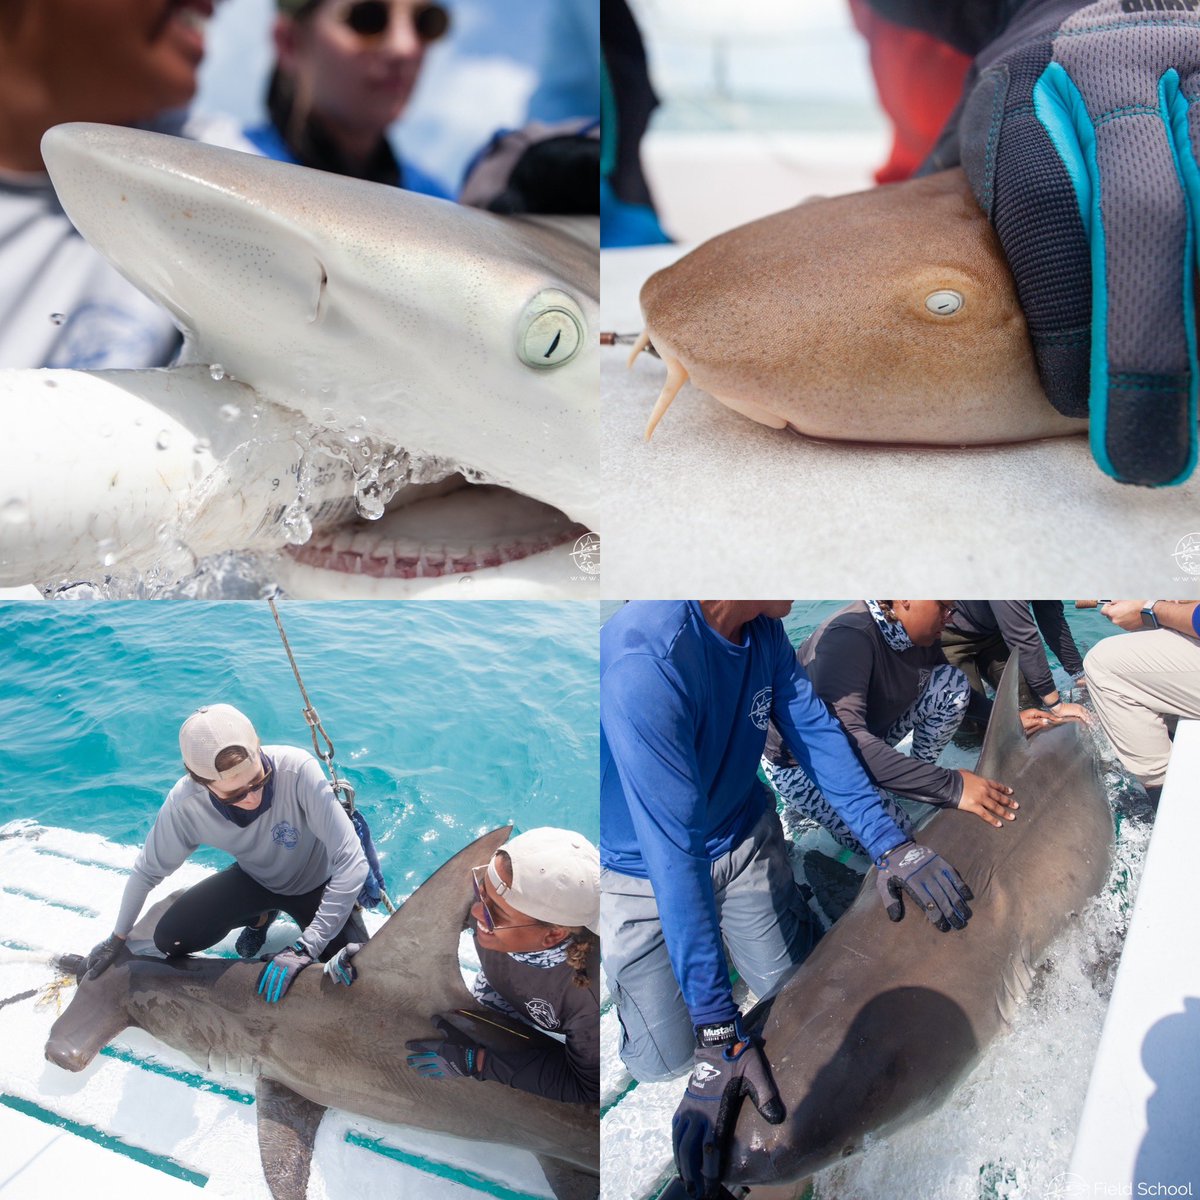 Had an amazing opportunity learning the ropes of field work with sharks for a week among an amazing group of scientist #blackinmarinescience